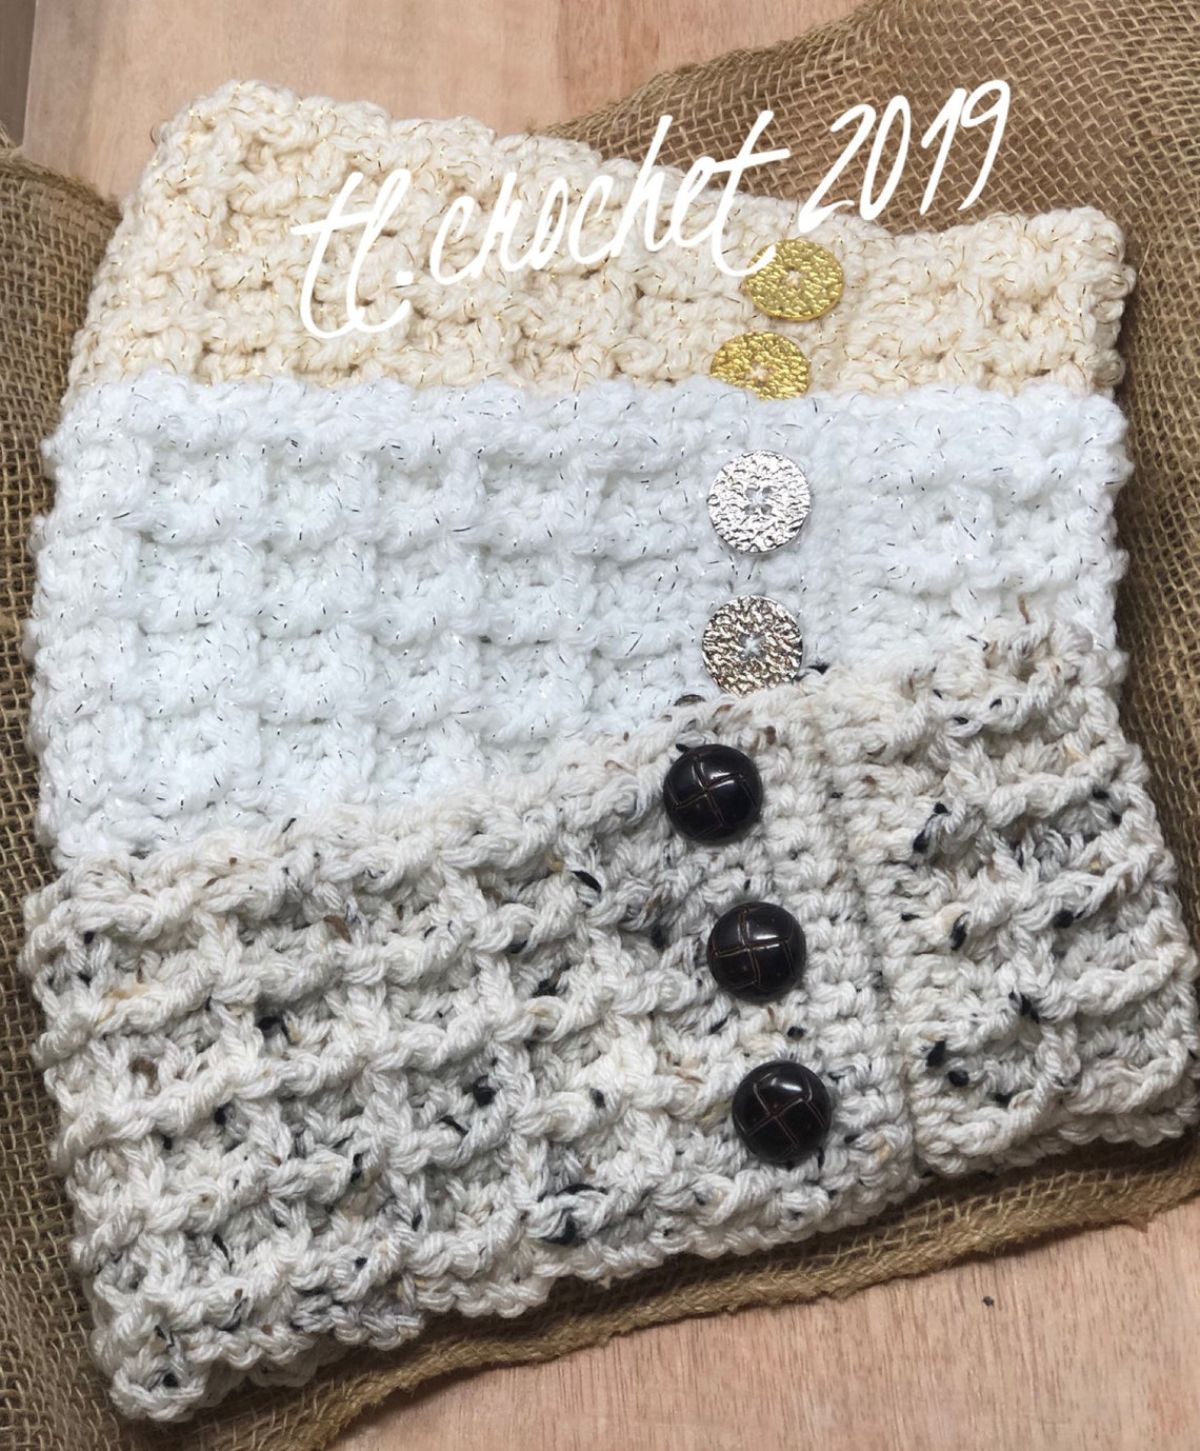 Pale gray, white, and light yellow crochet ear warmers with waffle design and three buttons off the center on a brown hessian background. 